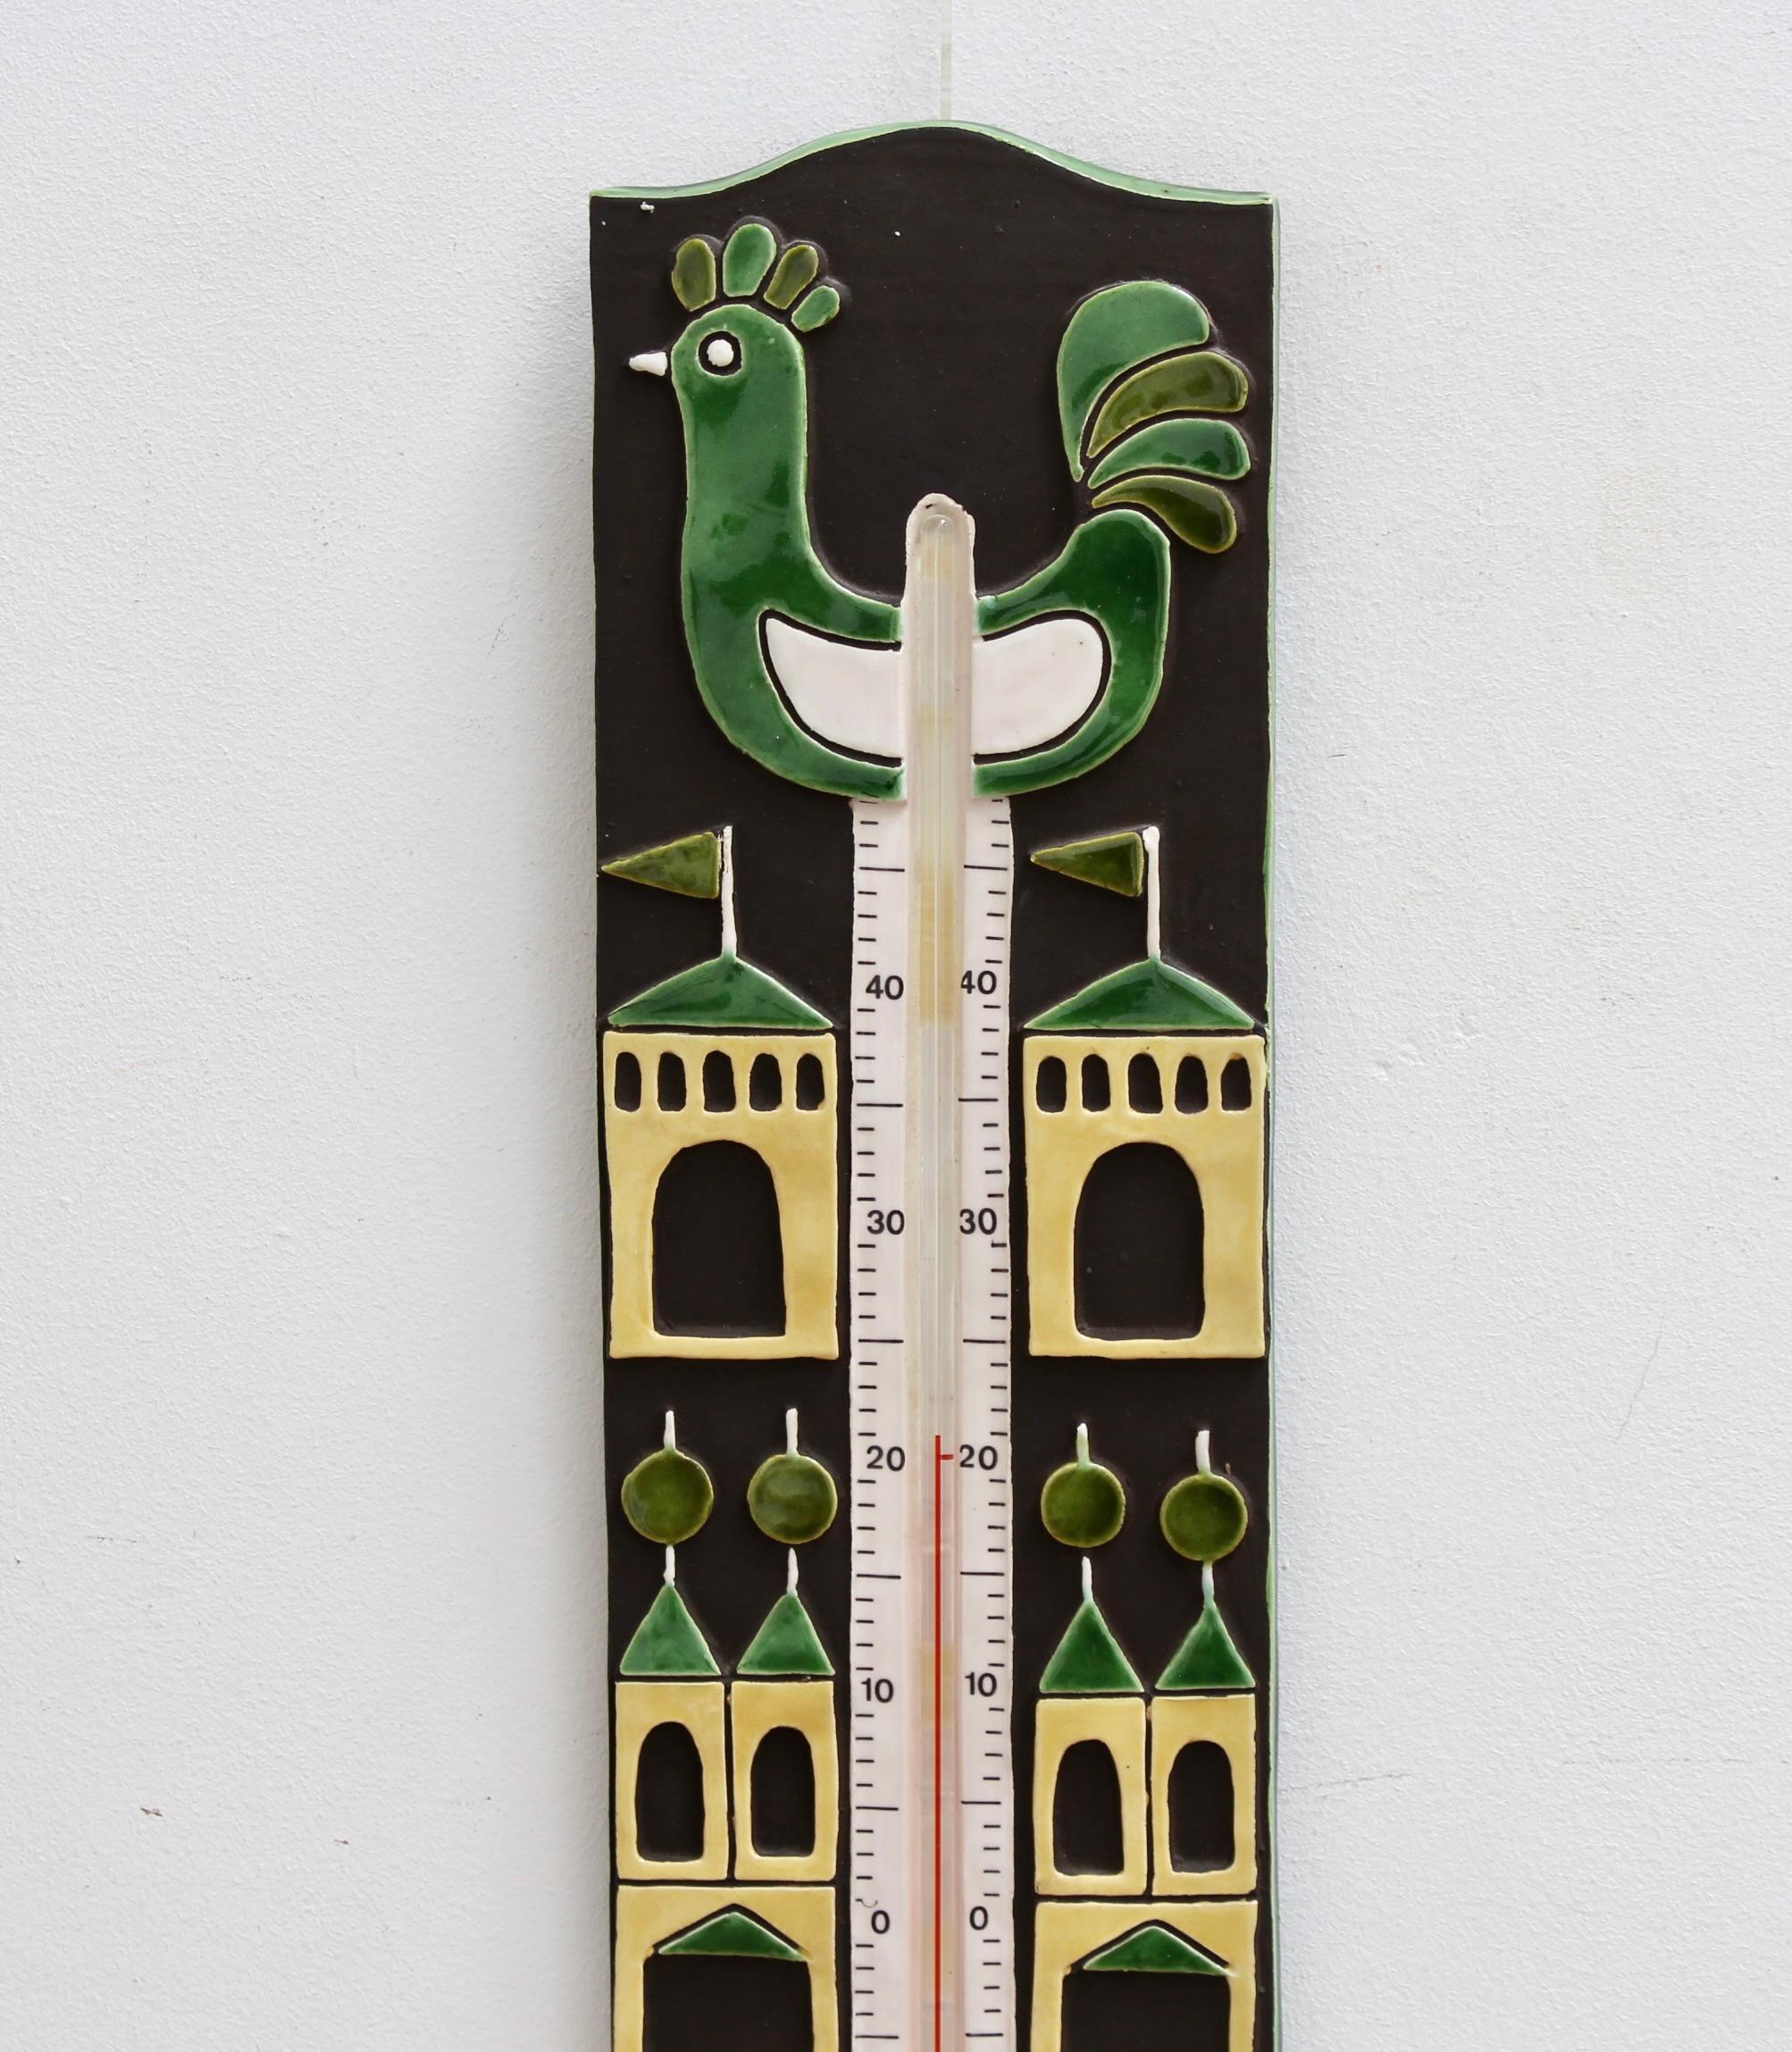 Decorative, French vintage ceramic thermometer and casing by Mithé Espelt (circa 1960s). A delightful piece with stylised French coq and castle motifs. The hen is in a lovely deep green and a creamy white; the castles are yellow and green. With a